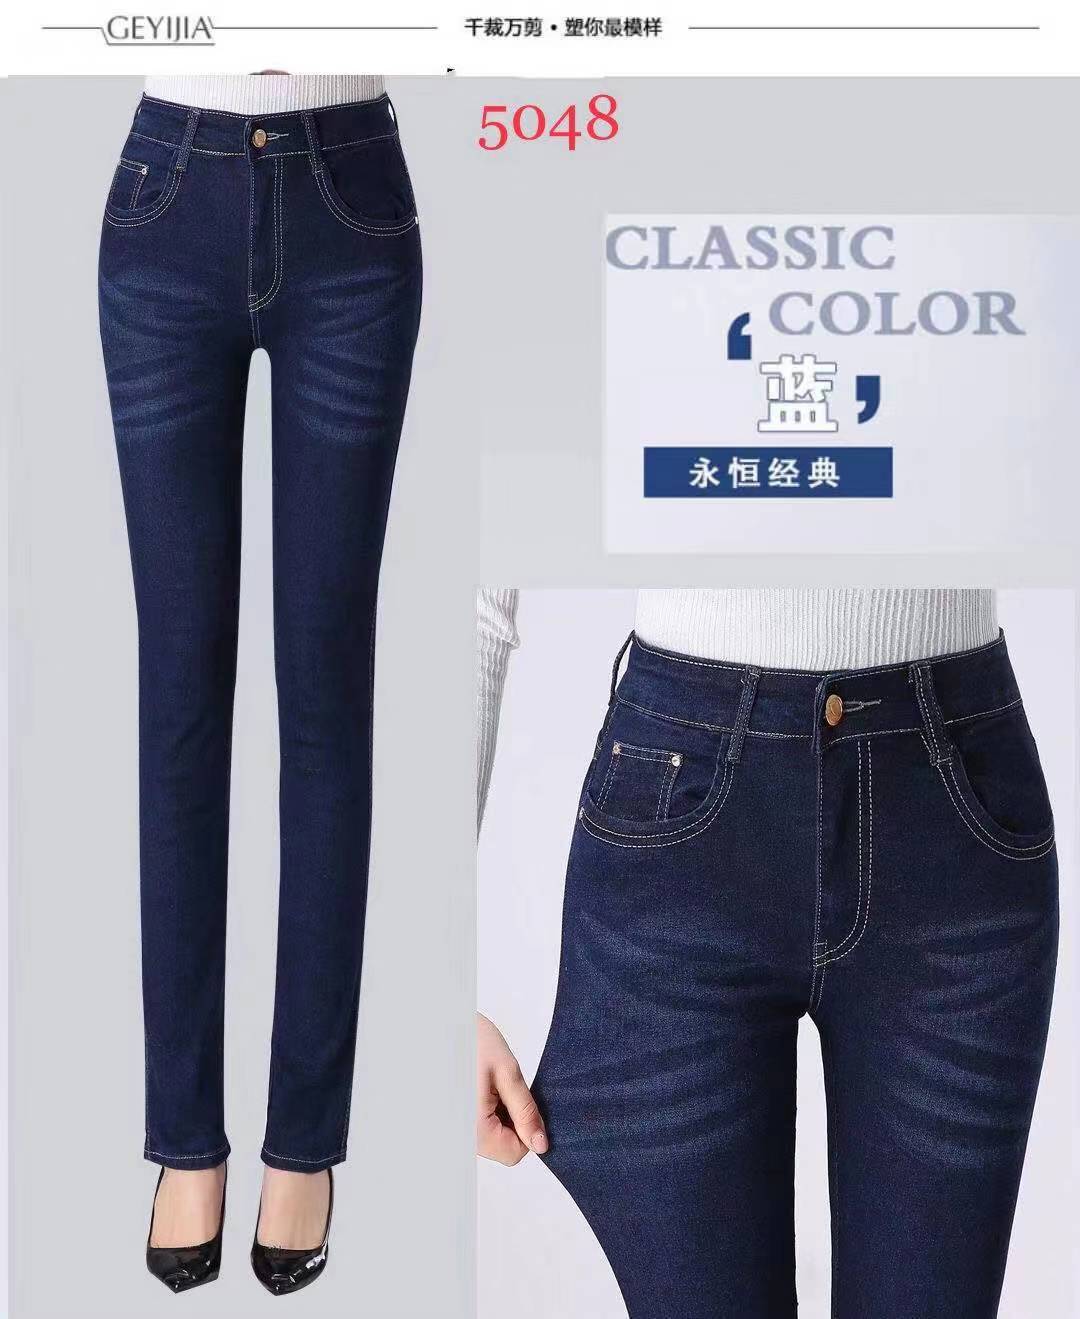 new jeans 2019